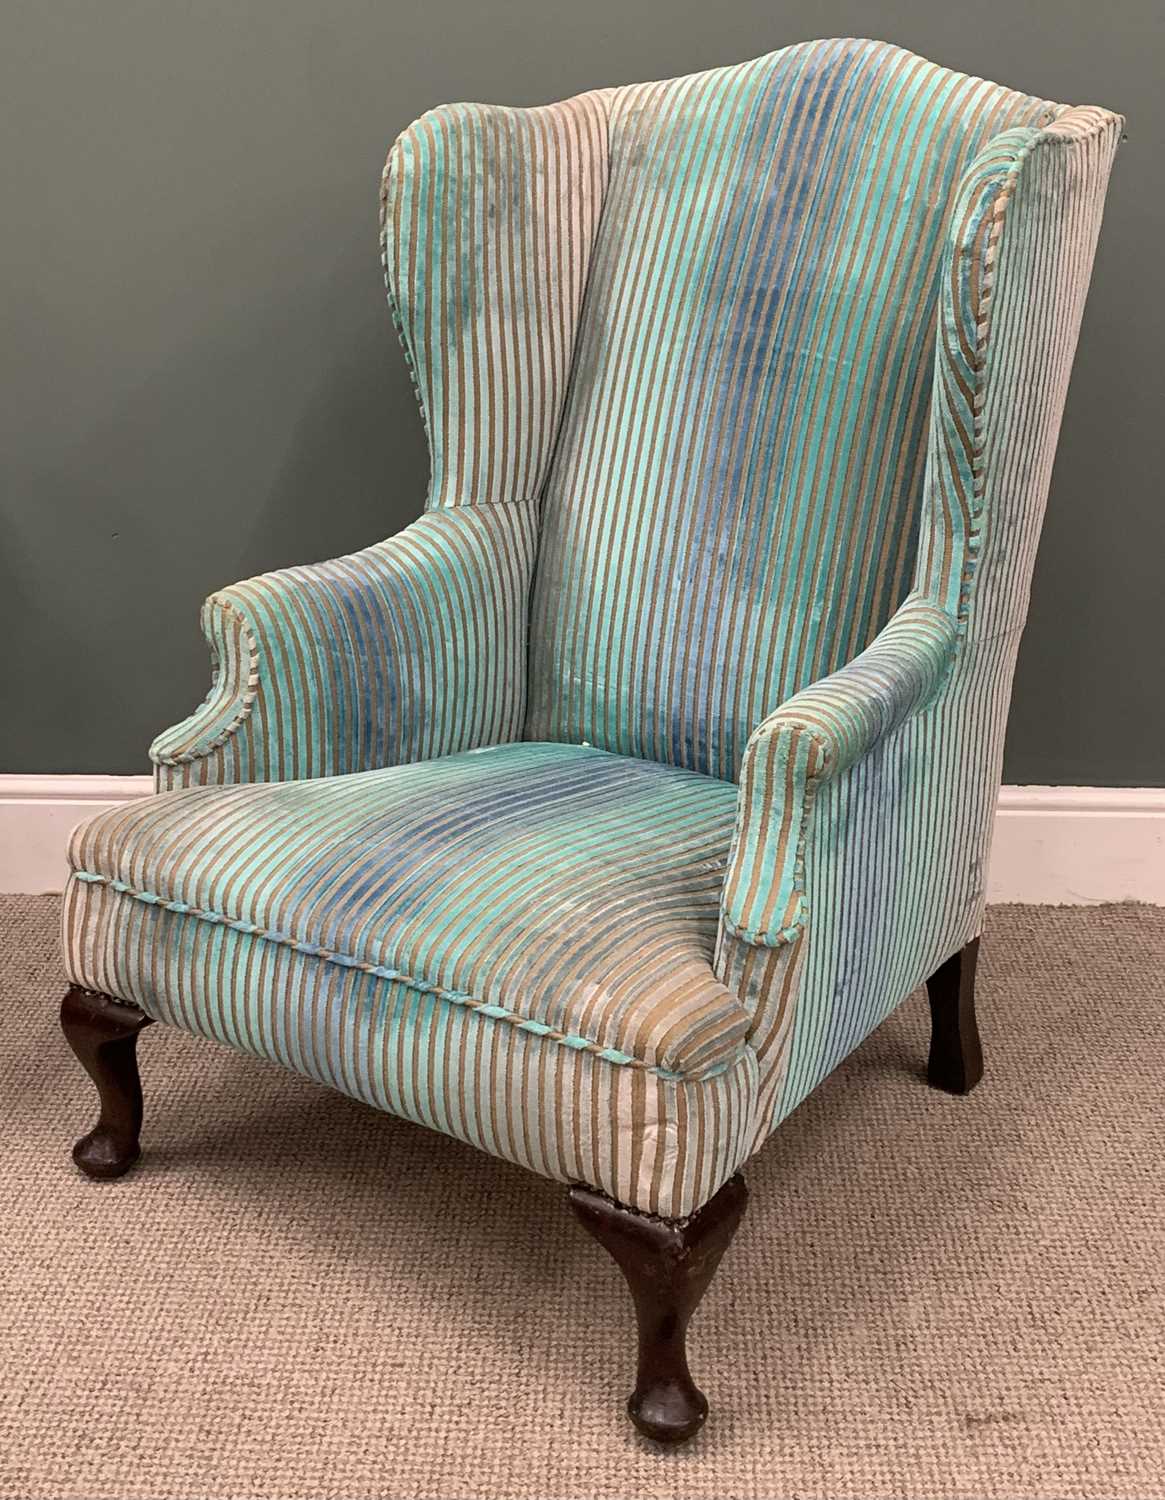 VINTAGE RE-UPHOLSTERED WINGBACK ARMCHAIR, blue striped chenille, oversized seat, Queen Anne front - Image 2 of 4